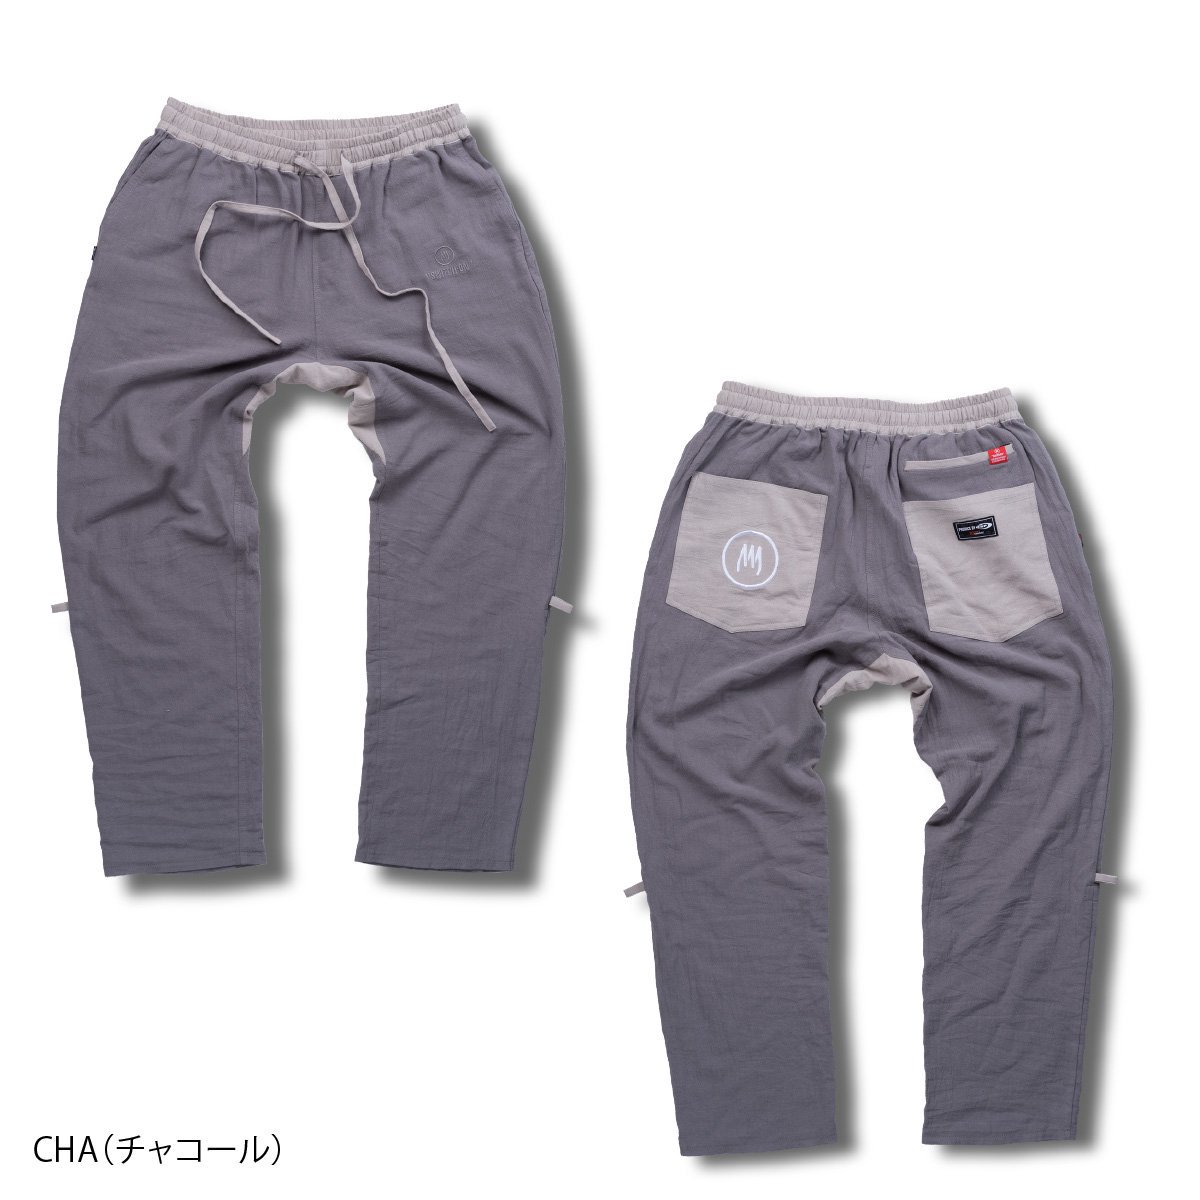 <img class='new_mark_img1' src='https://img.shop-pro.jp/img/new/icons47.gif' style='border:none;display:inline;margin:0px;padding:0px;width:auto;' />Ez comfort Pants